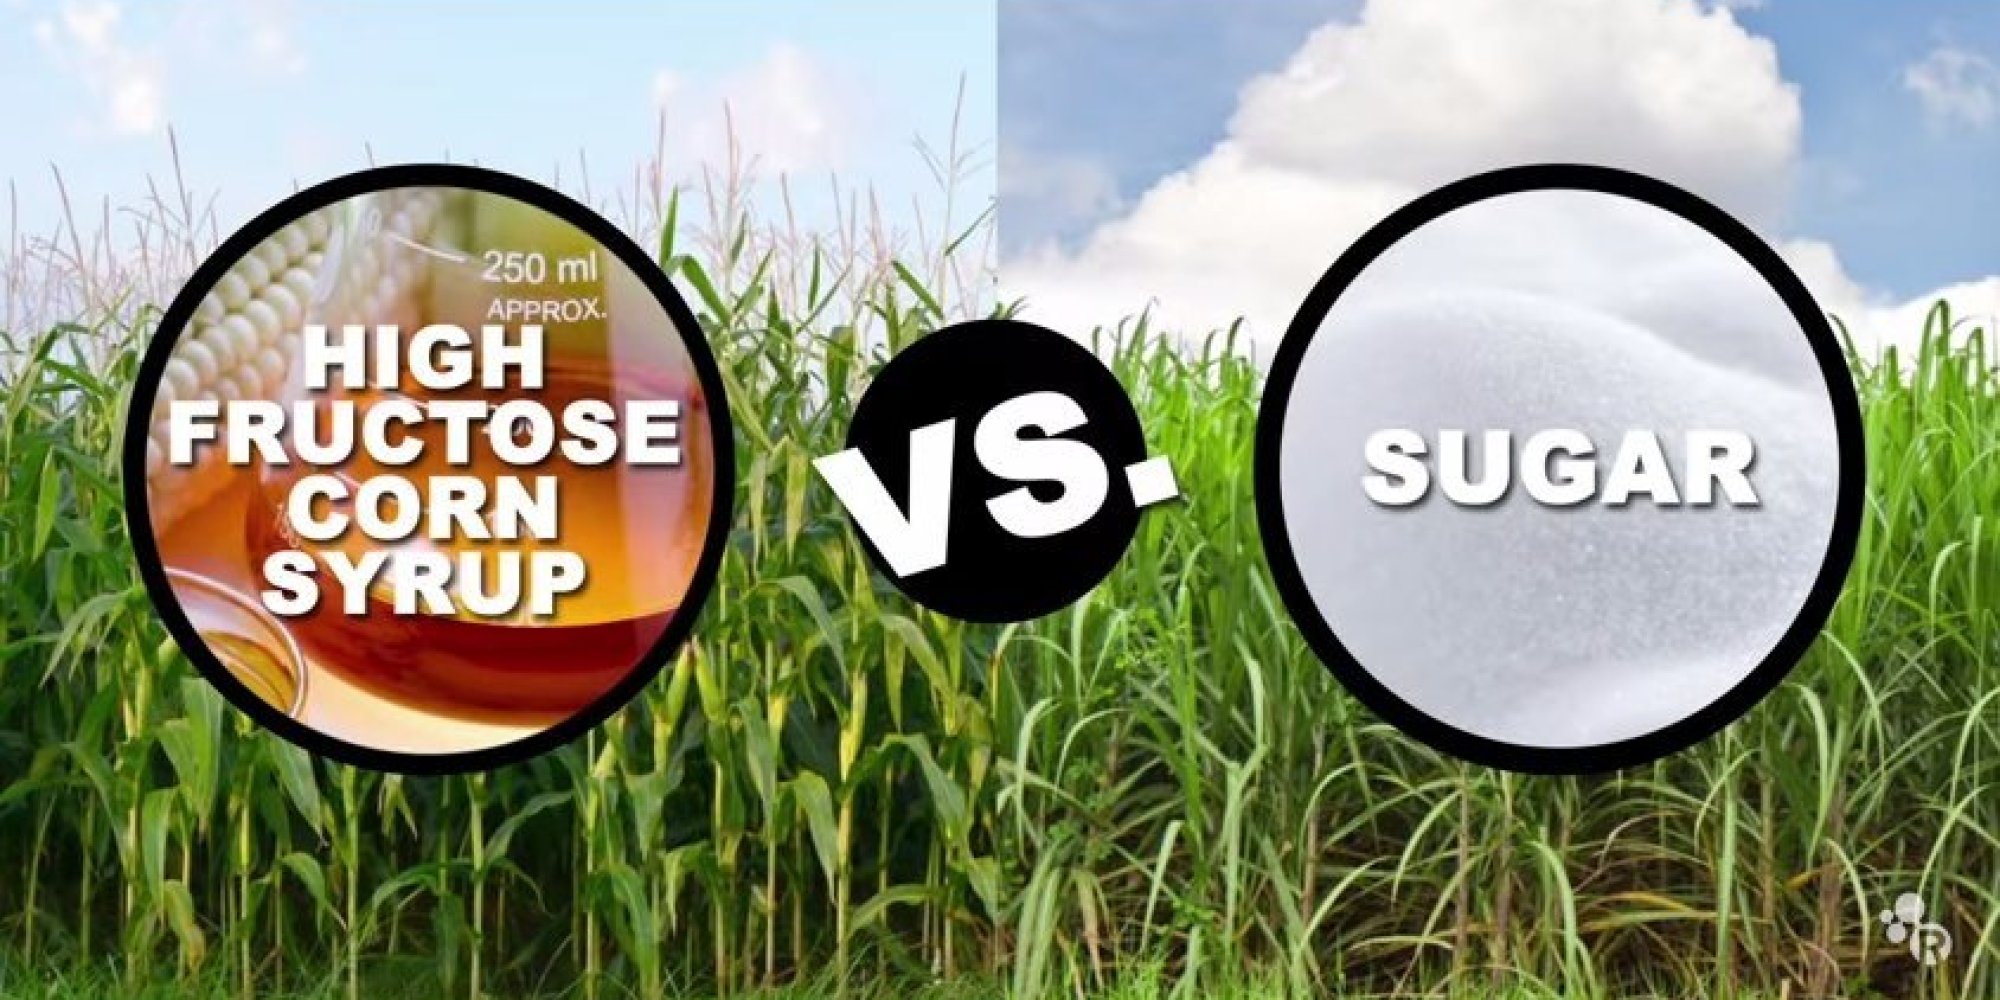 High-Fructose Corn Syrup: Just Like Sugar, or Worse?